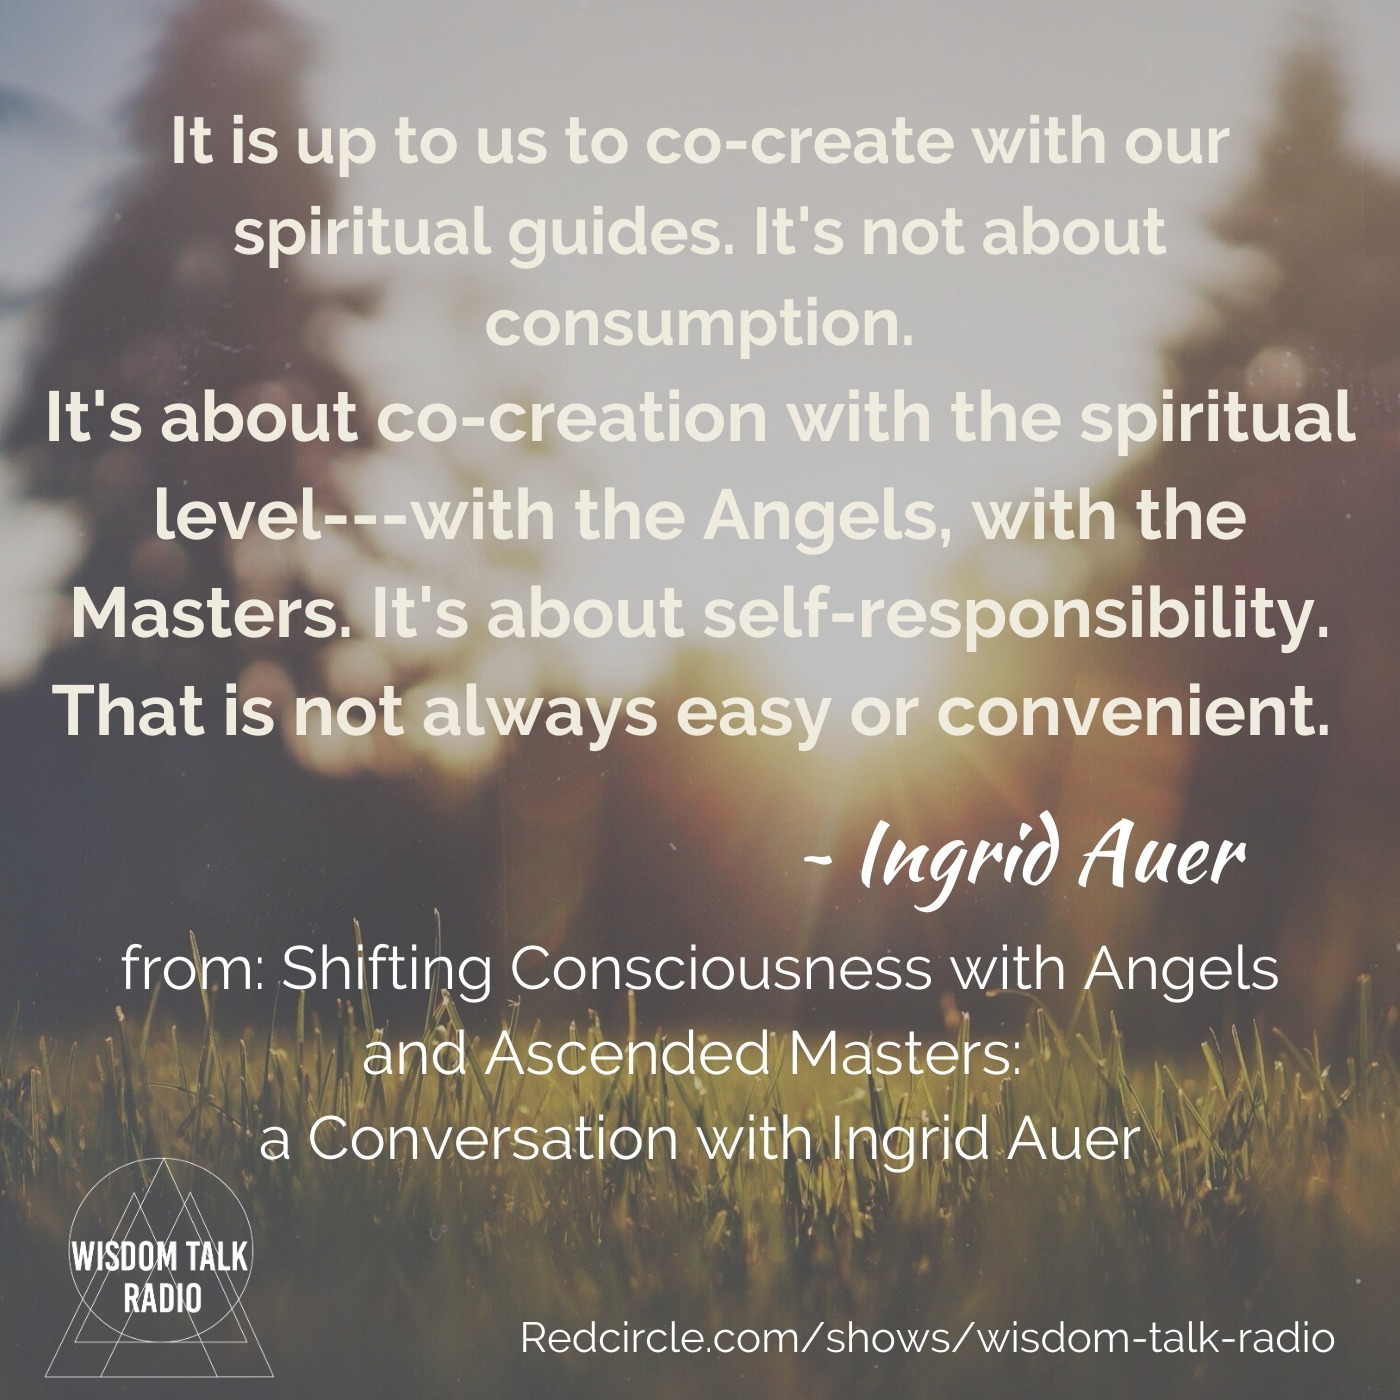 Shifting Consciousness with Angels and Ascended Masters: A conversation with Ingrid Auer